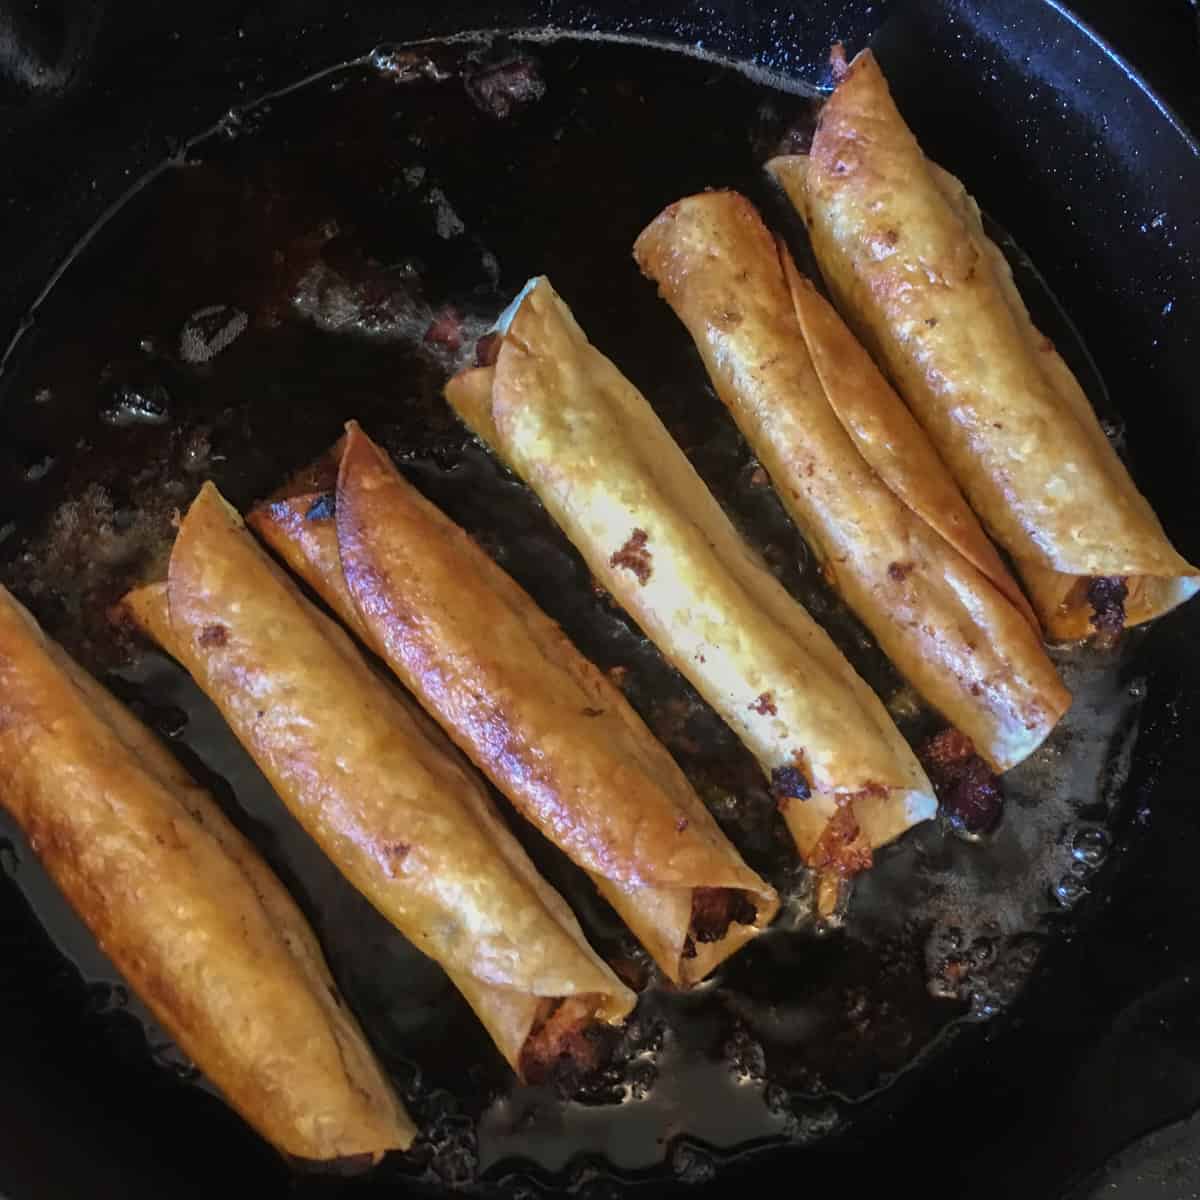 Fried flautas ready to come out of the hot oil.